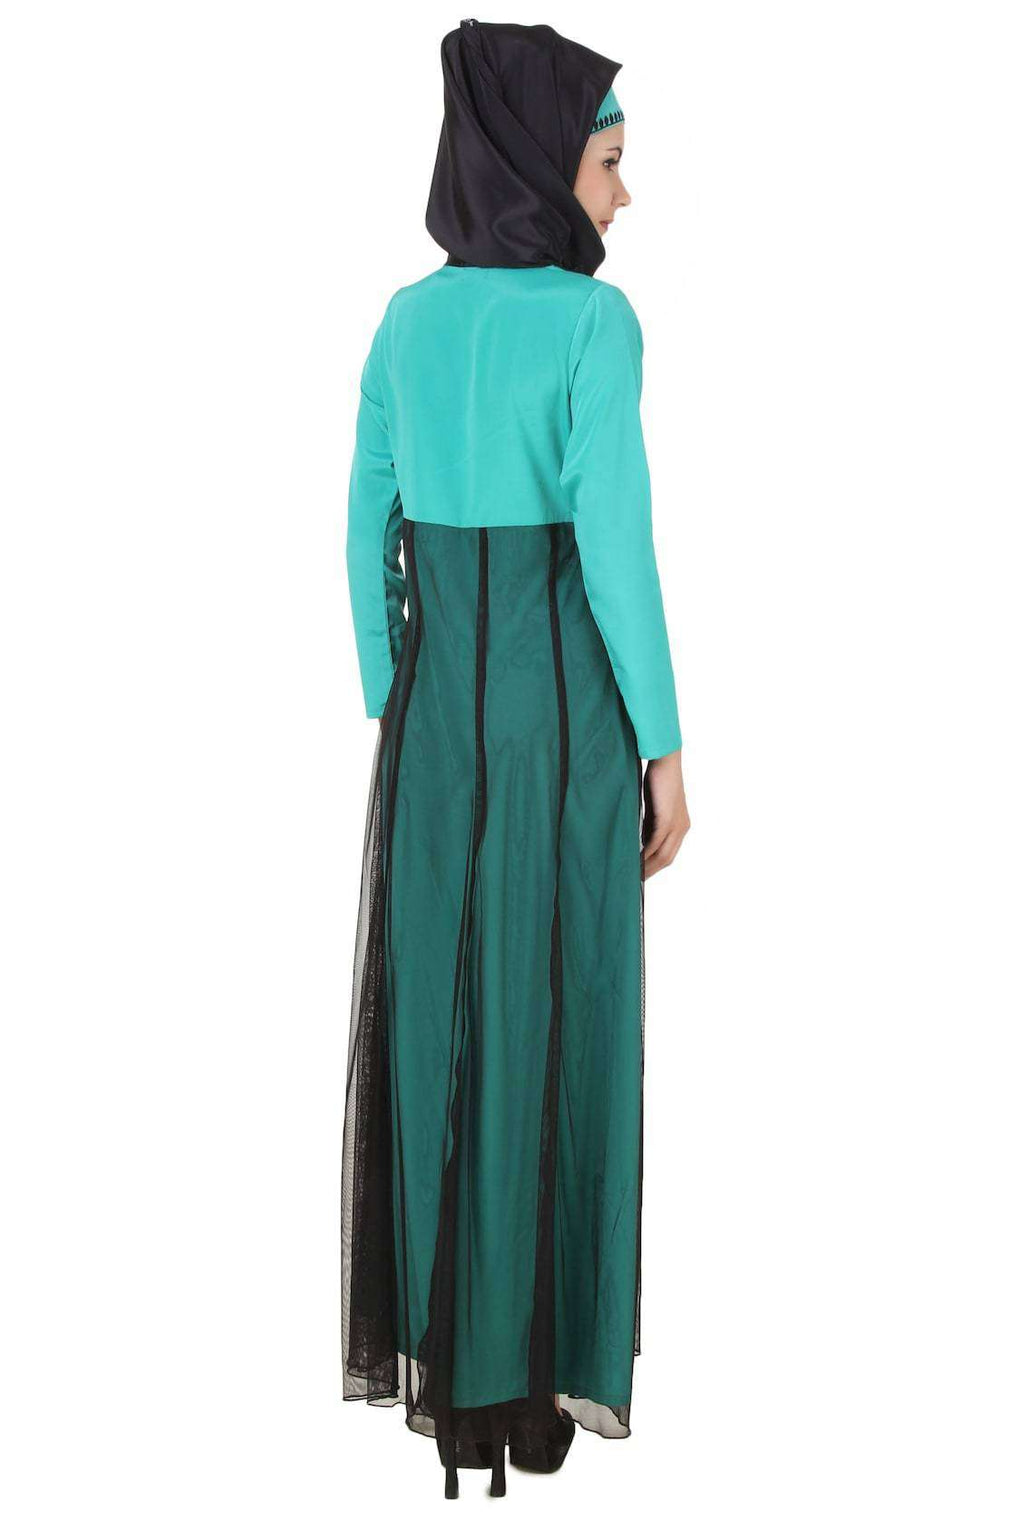 Manab Fancy Turquoise-Green and Black Net and Crepe Abaya Back